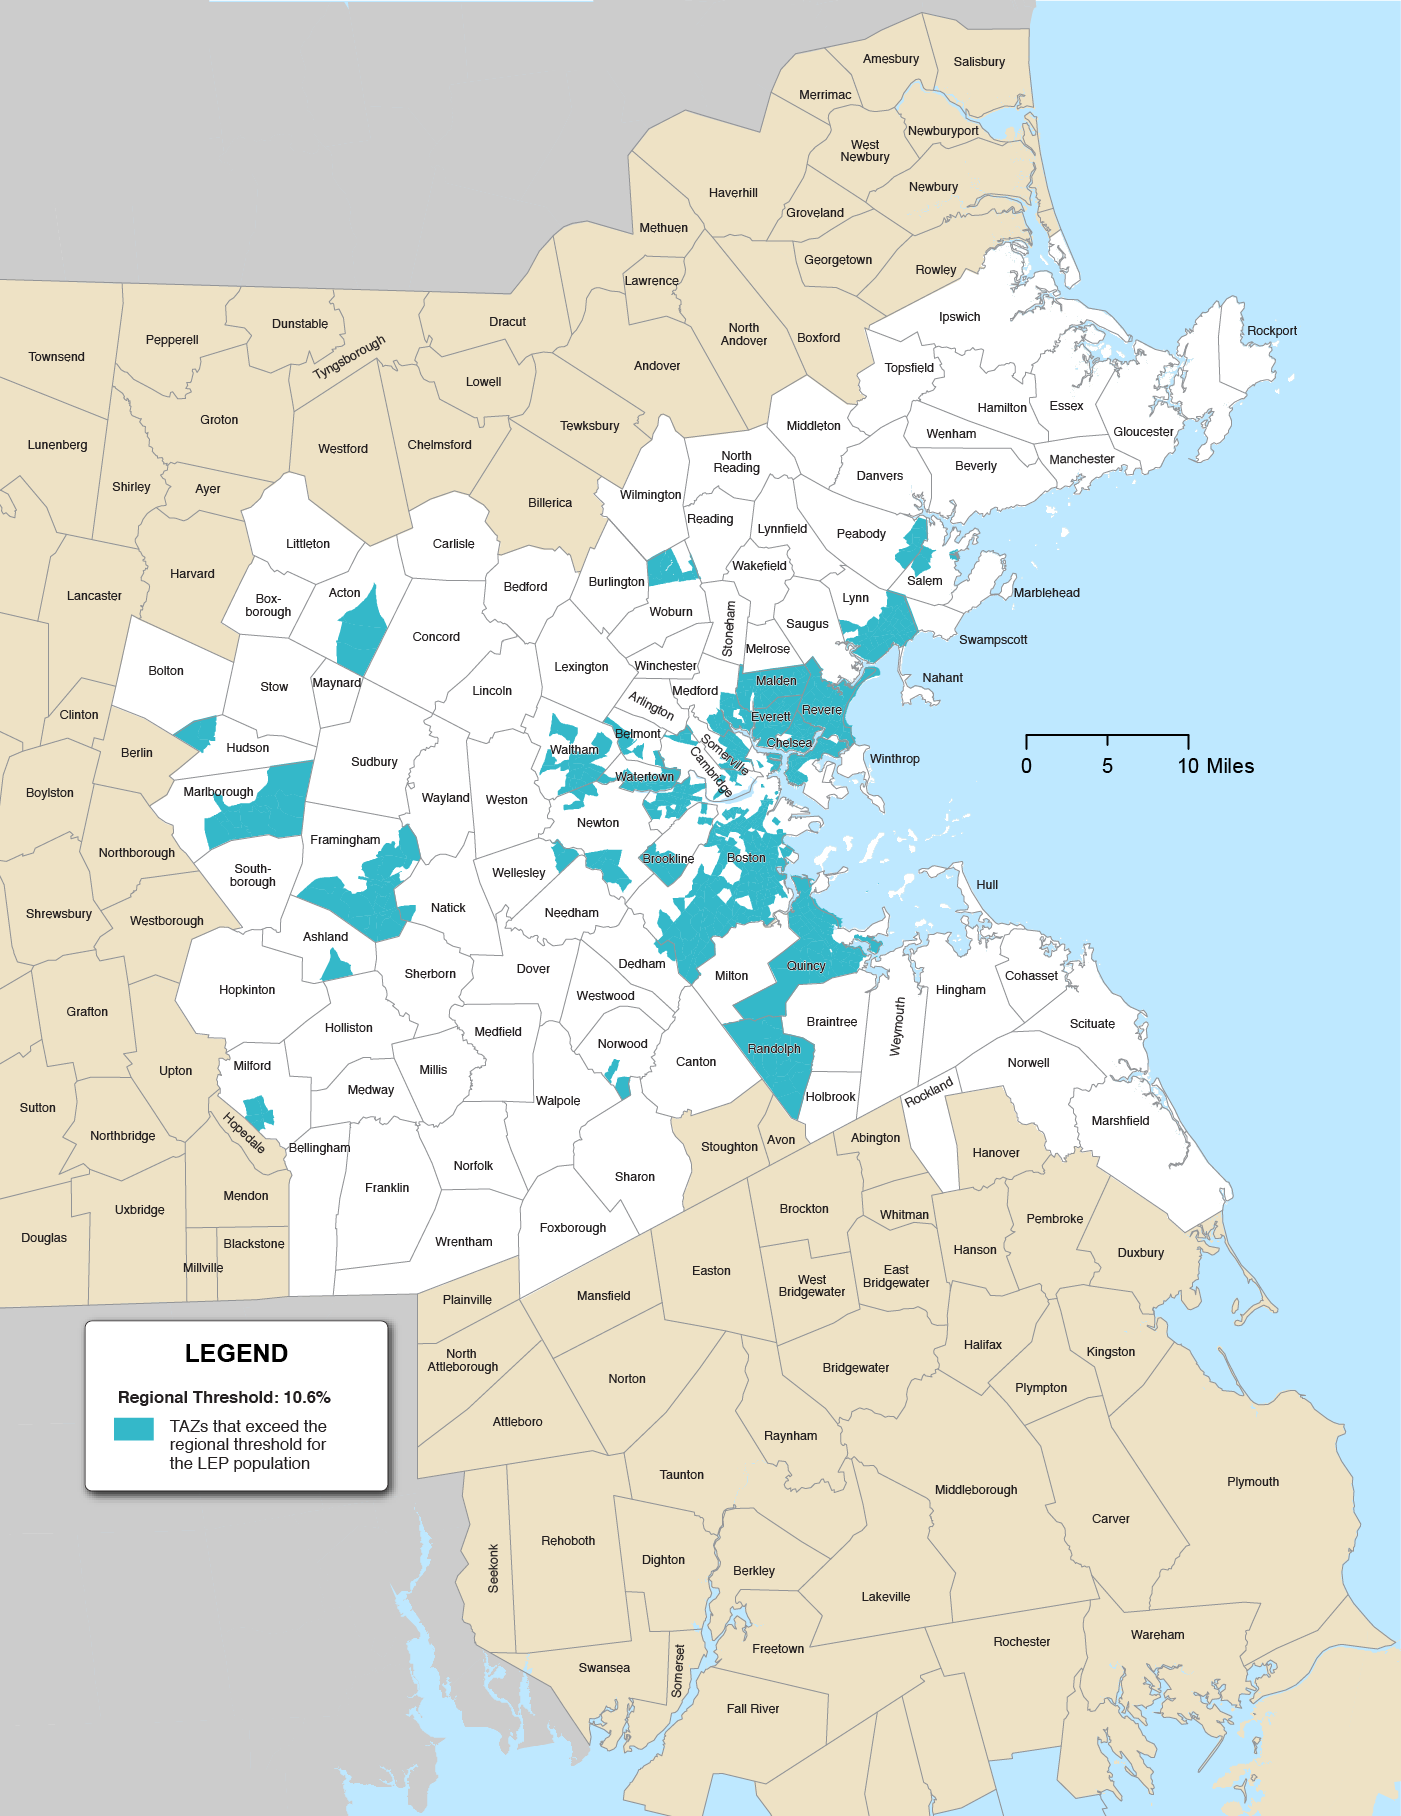 Figure 8-3 is a map of the Boston Region municipalities and the TAZs that exceed the regional threshold for the LEP population highlighted in teal. The Regional Threshold is 10.6%.